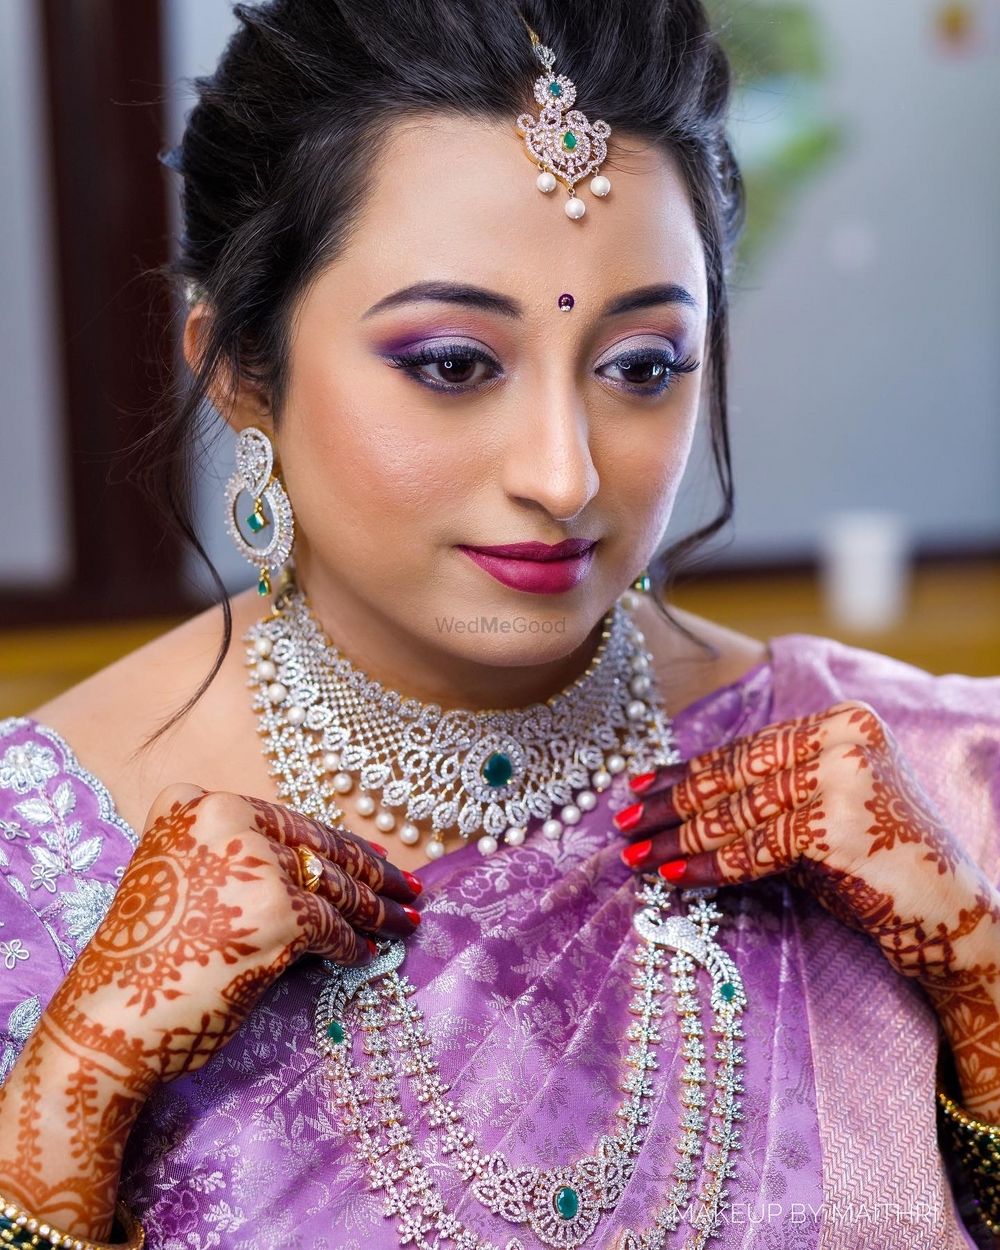 Photo By Makeup By Maithri - Bridal Makeup